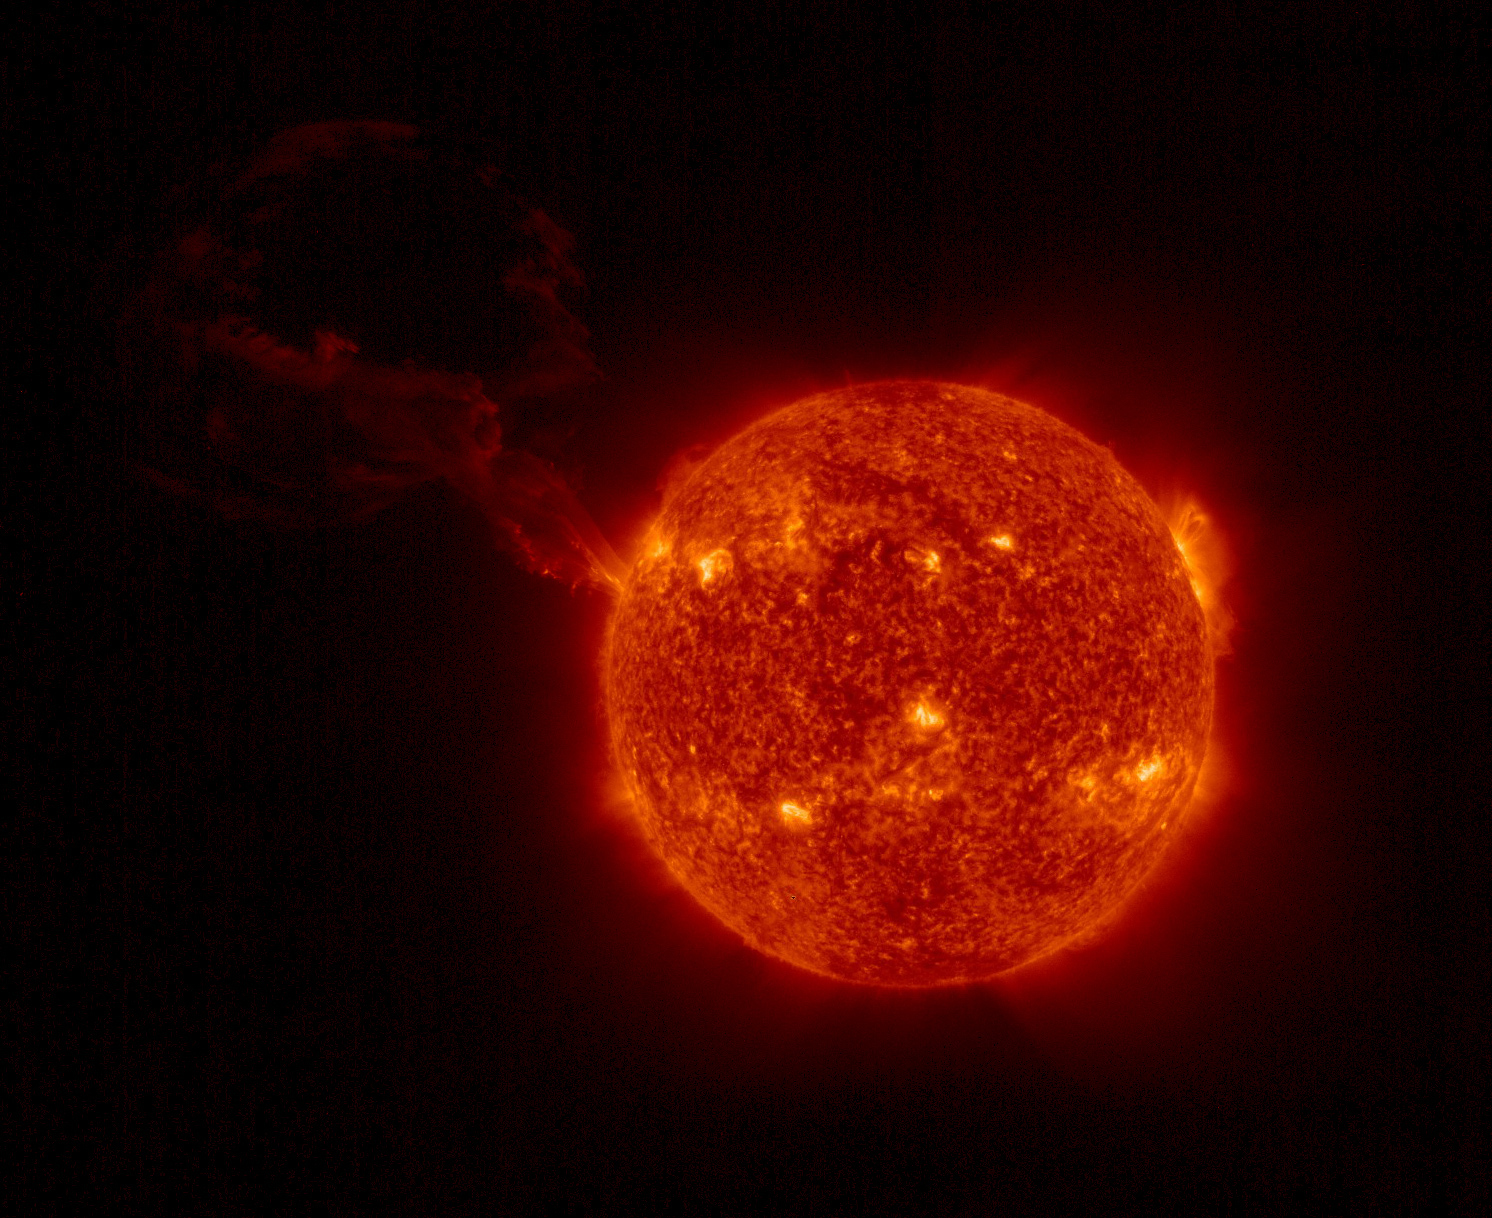 A look at the sun, with a large plume of plasma visibly erupting in a wide, looping arc in the top left quadrant of the image.